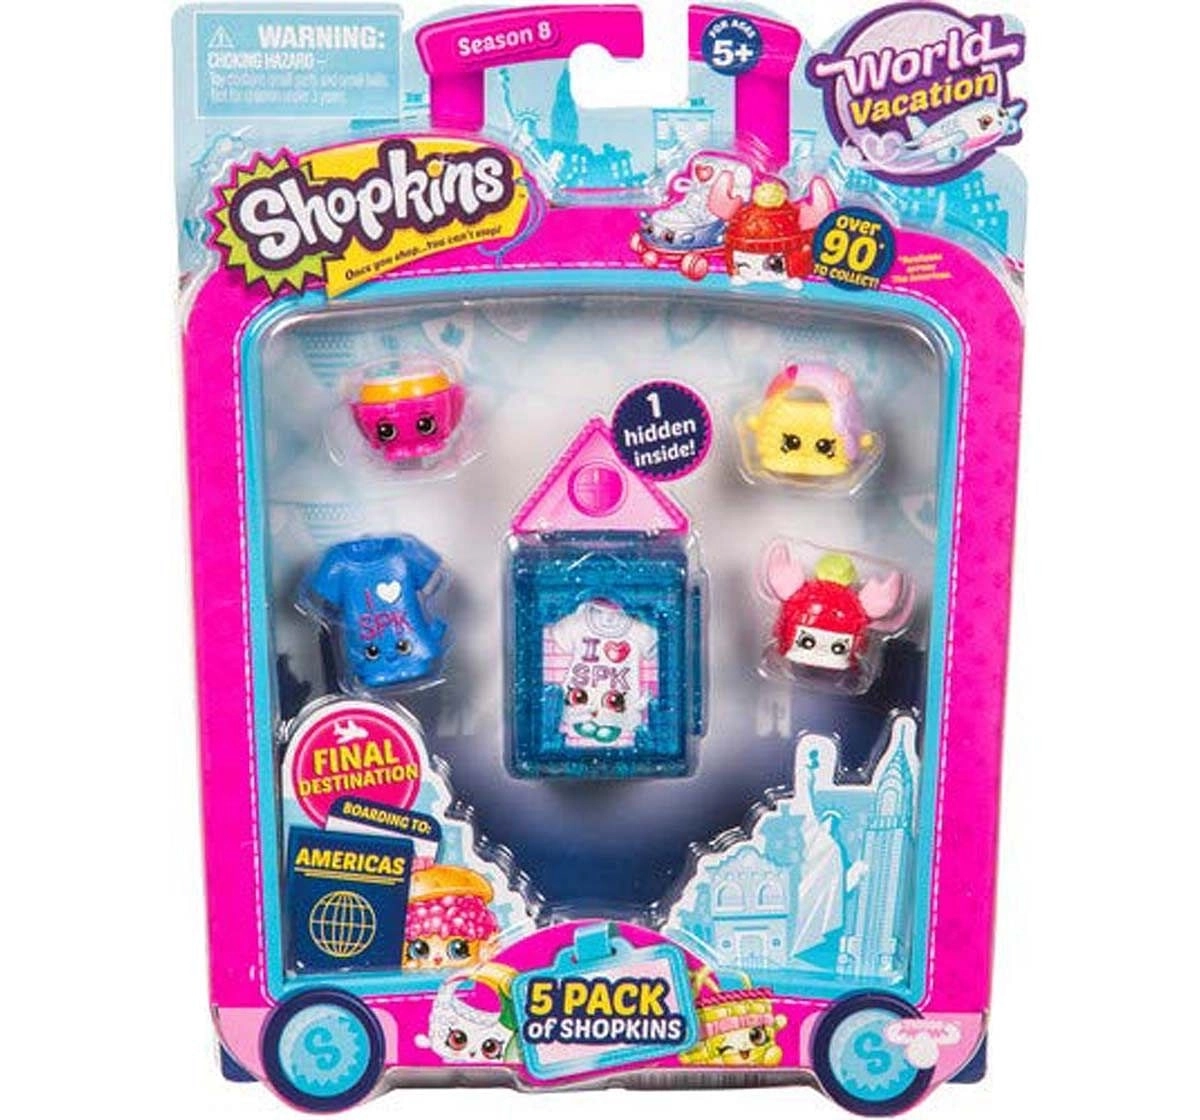 Shopkins Season 8 America Toy 5 Pack Collectable Dolls for age 4Y+ 